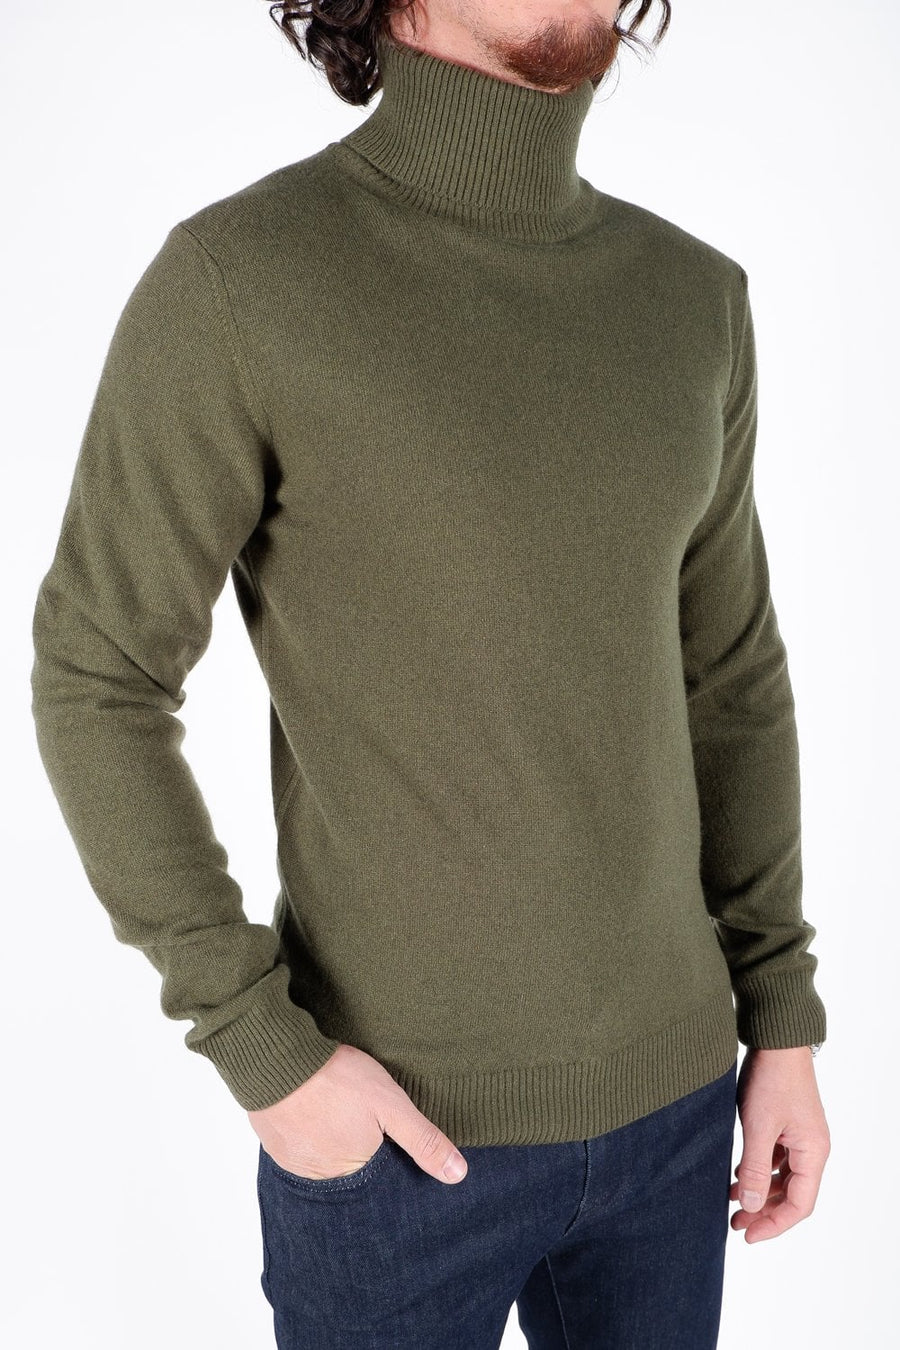 Buy the Daniele Fiesoli Roll Neck Jumper in Olive at Intro. Spend £50 for free UK delivery. Official stockists. We ship worldwide.